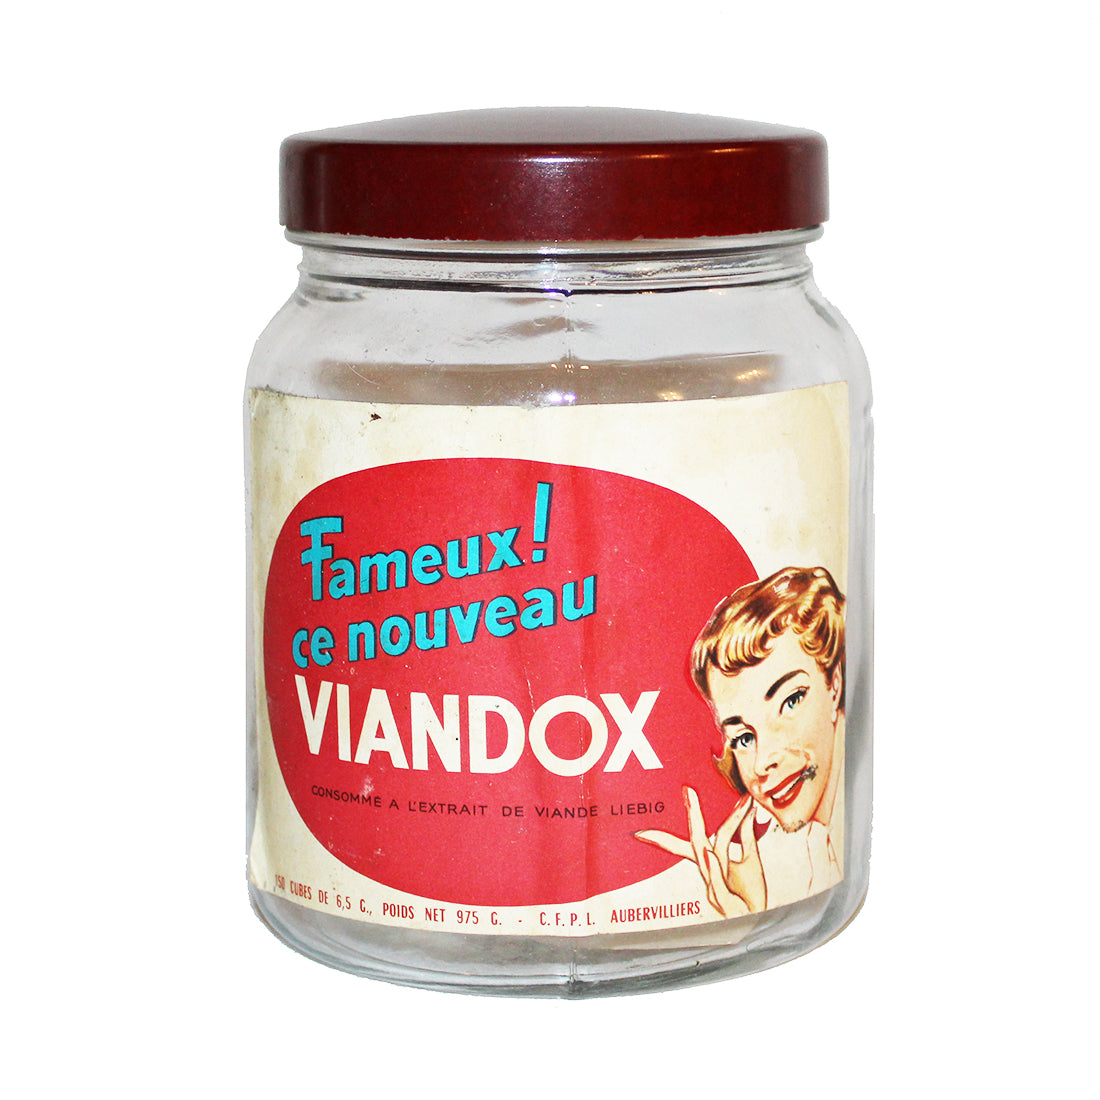 Old grocery store advertising jar Famous this new Viandox Liebig